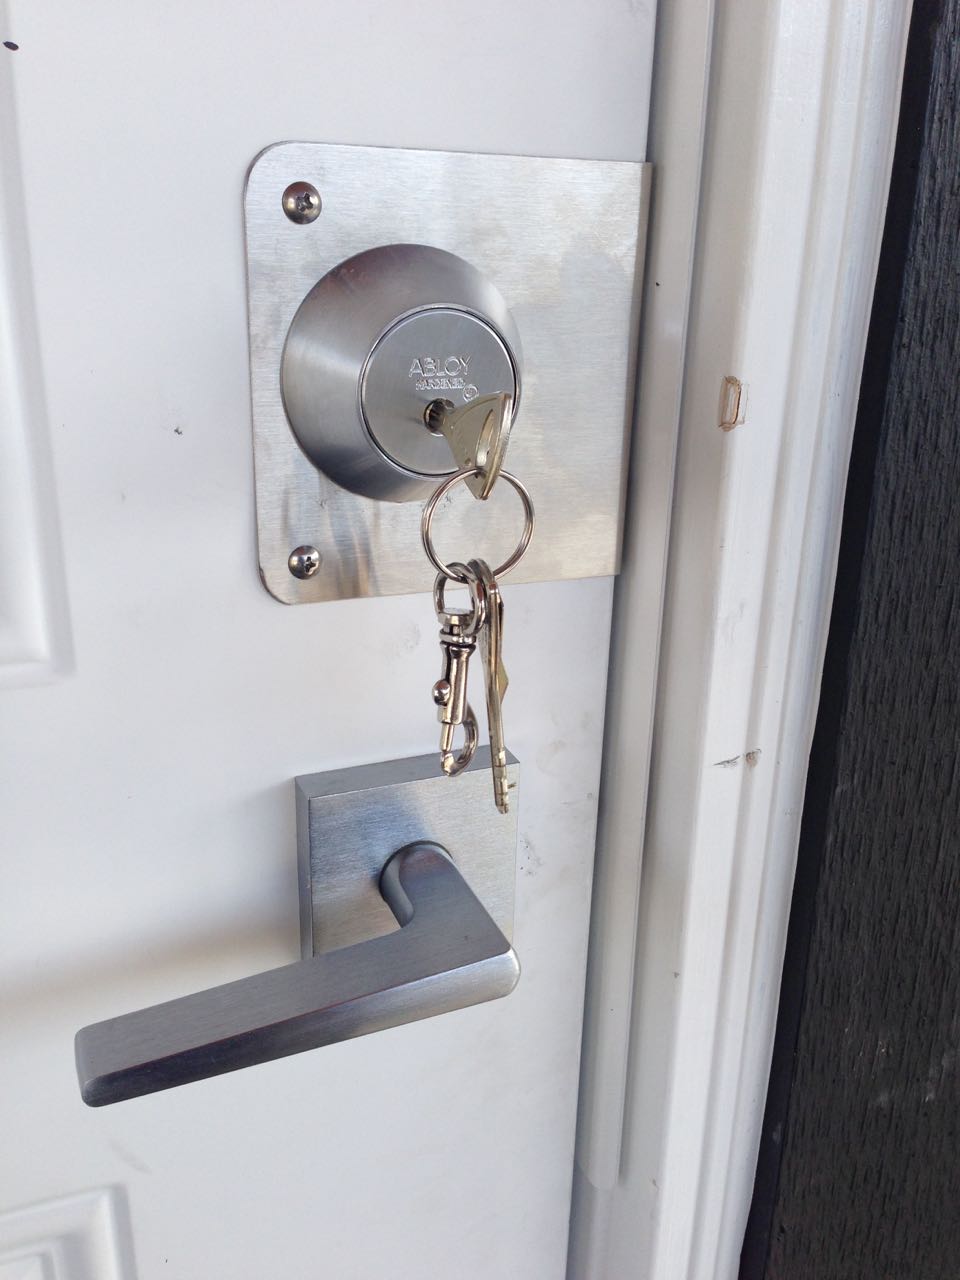 Mr. Locksmith is an ABLOY Protec Authorized Dealer